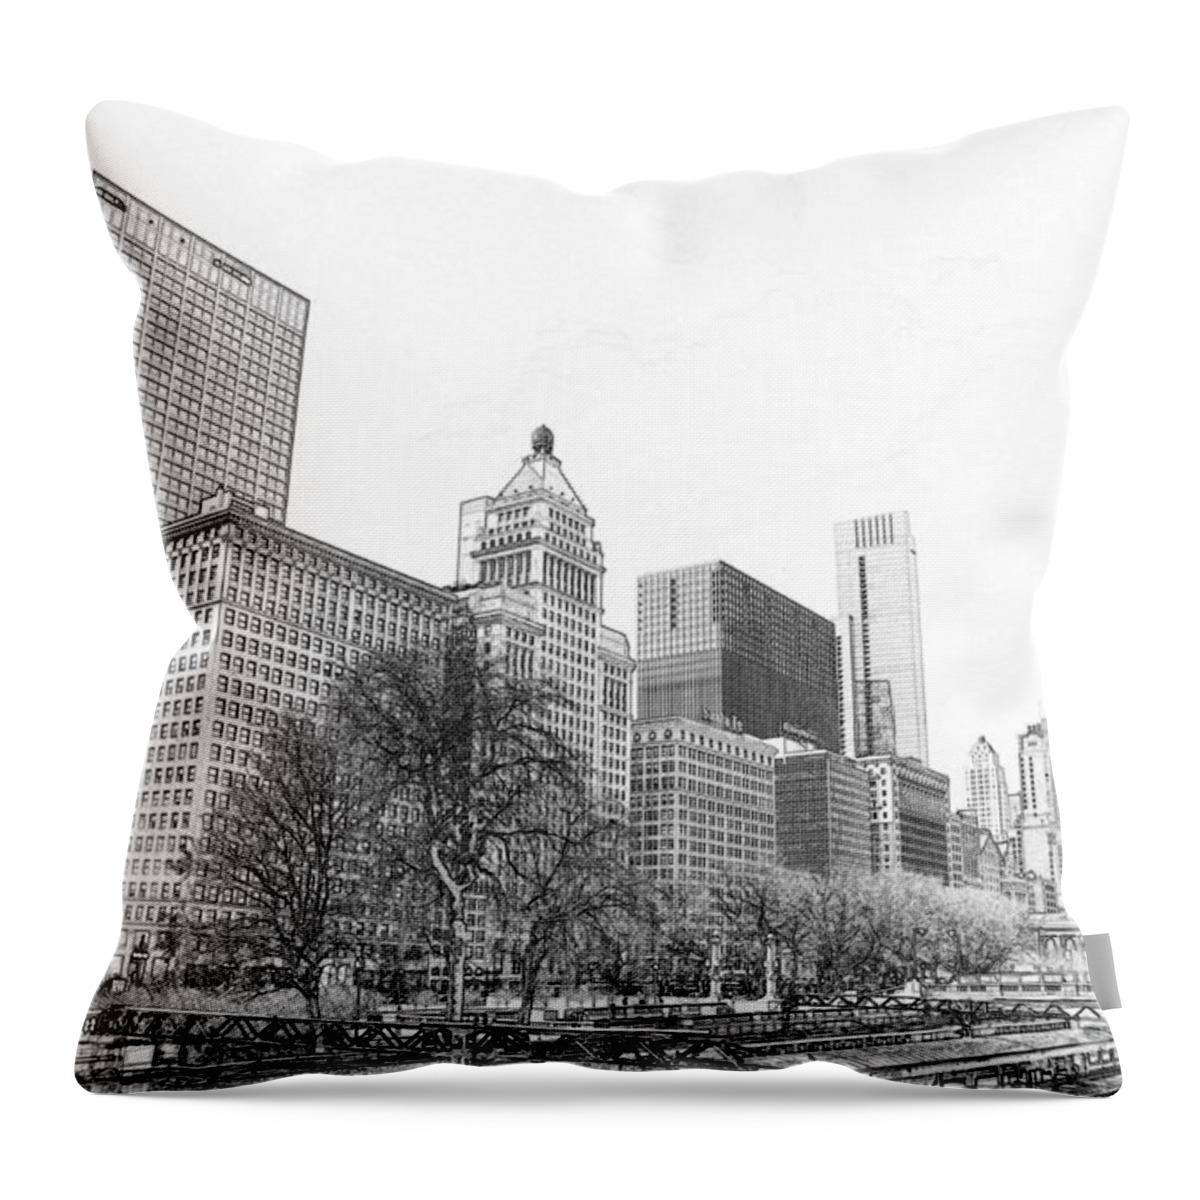 Grant Park Chicago Throw Pillow featuring the drawing Grant Park Chicago by Dejan Jovanovic